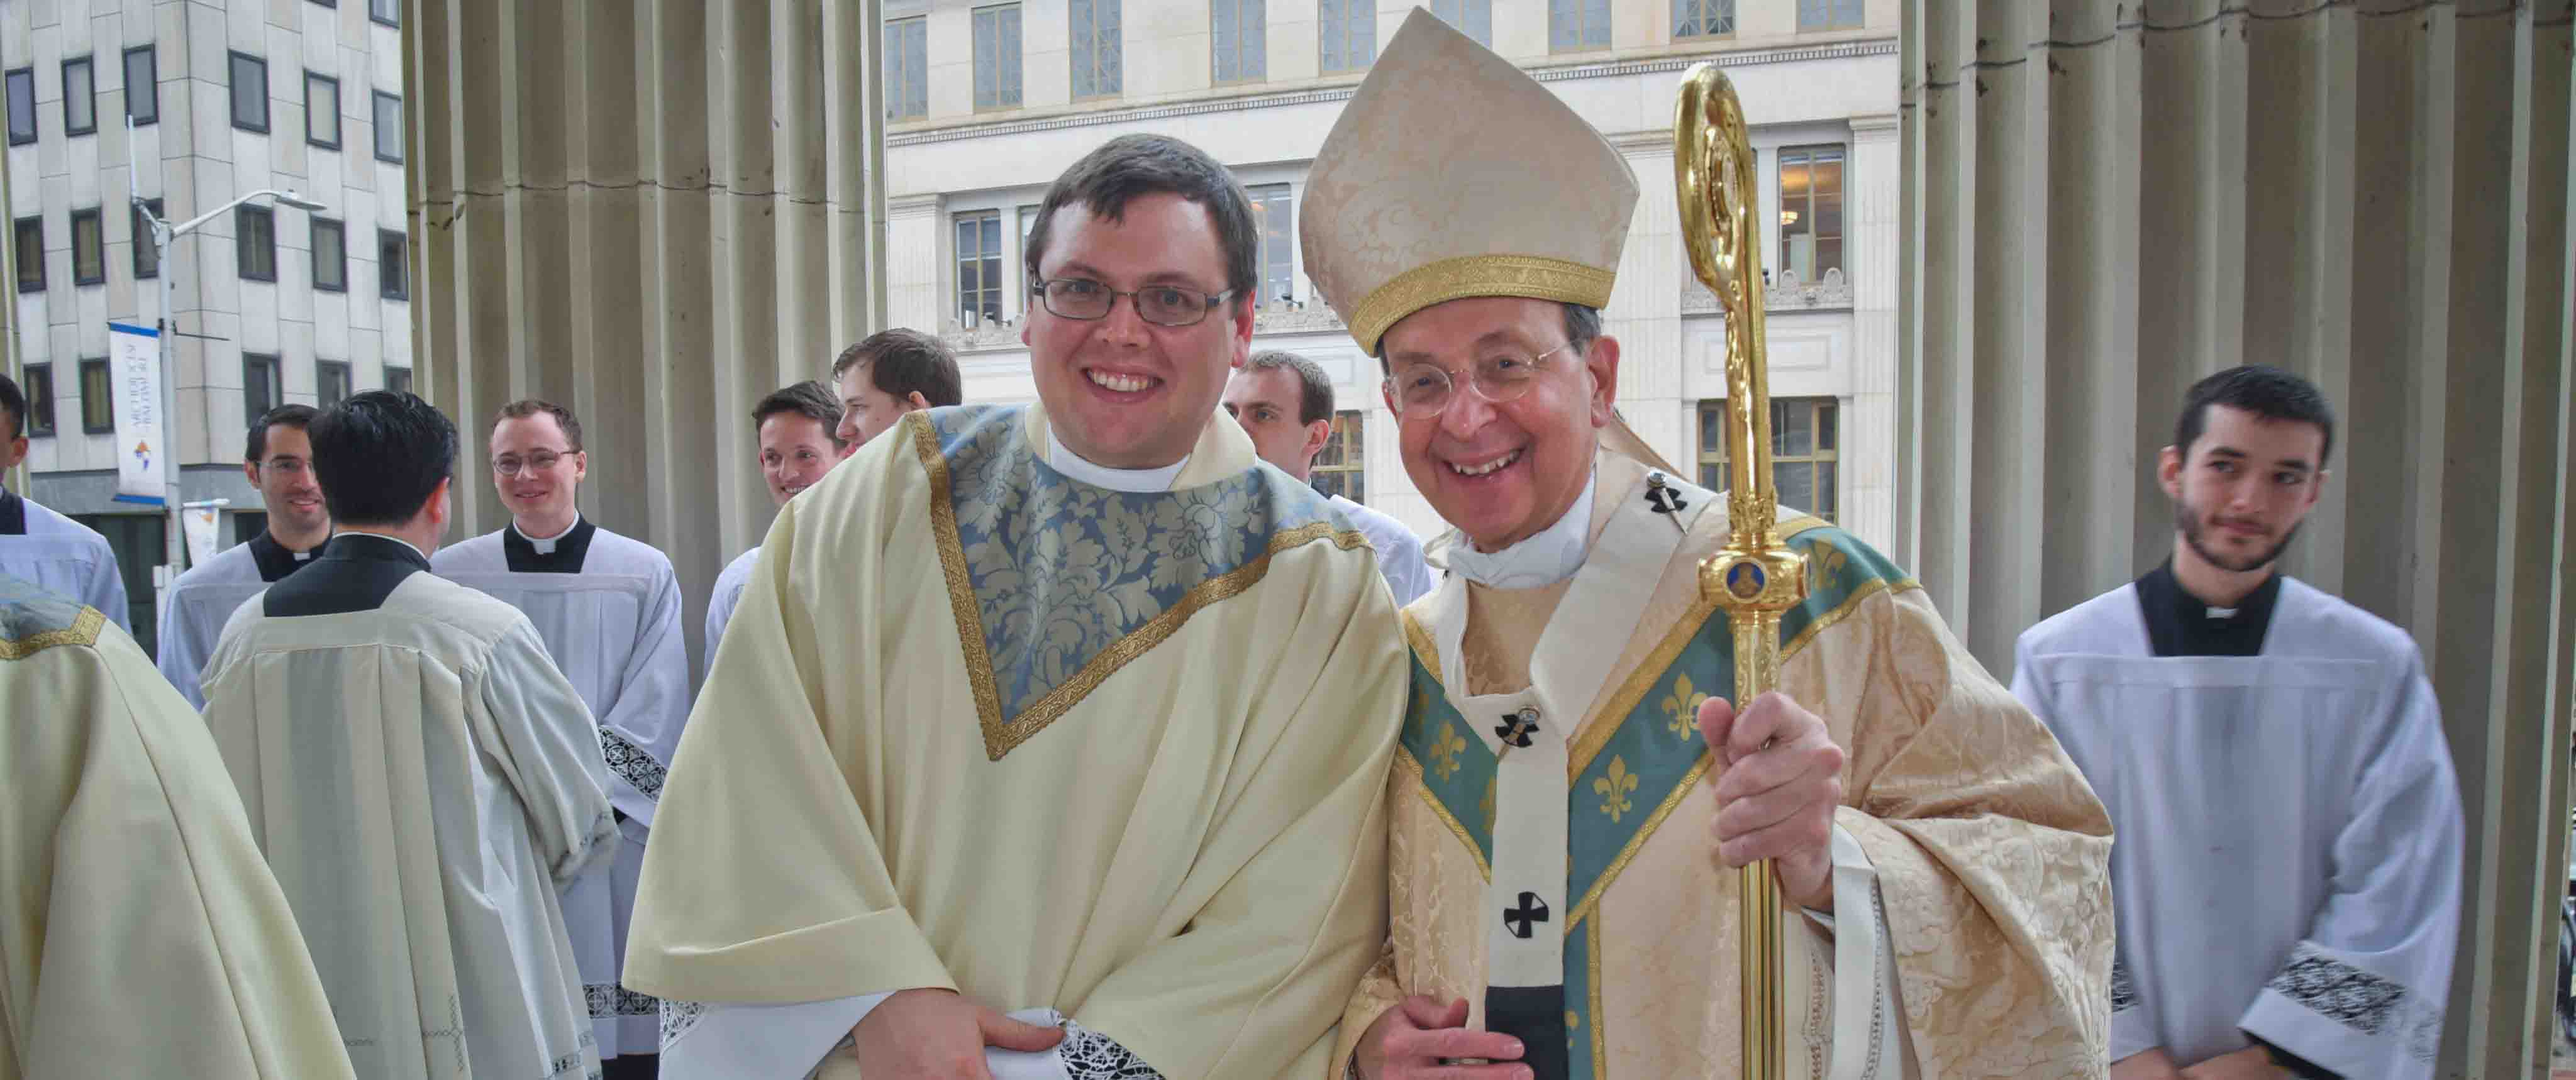 Archdiocese of Baltimore its newest priest Archdiocese of